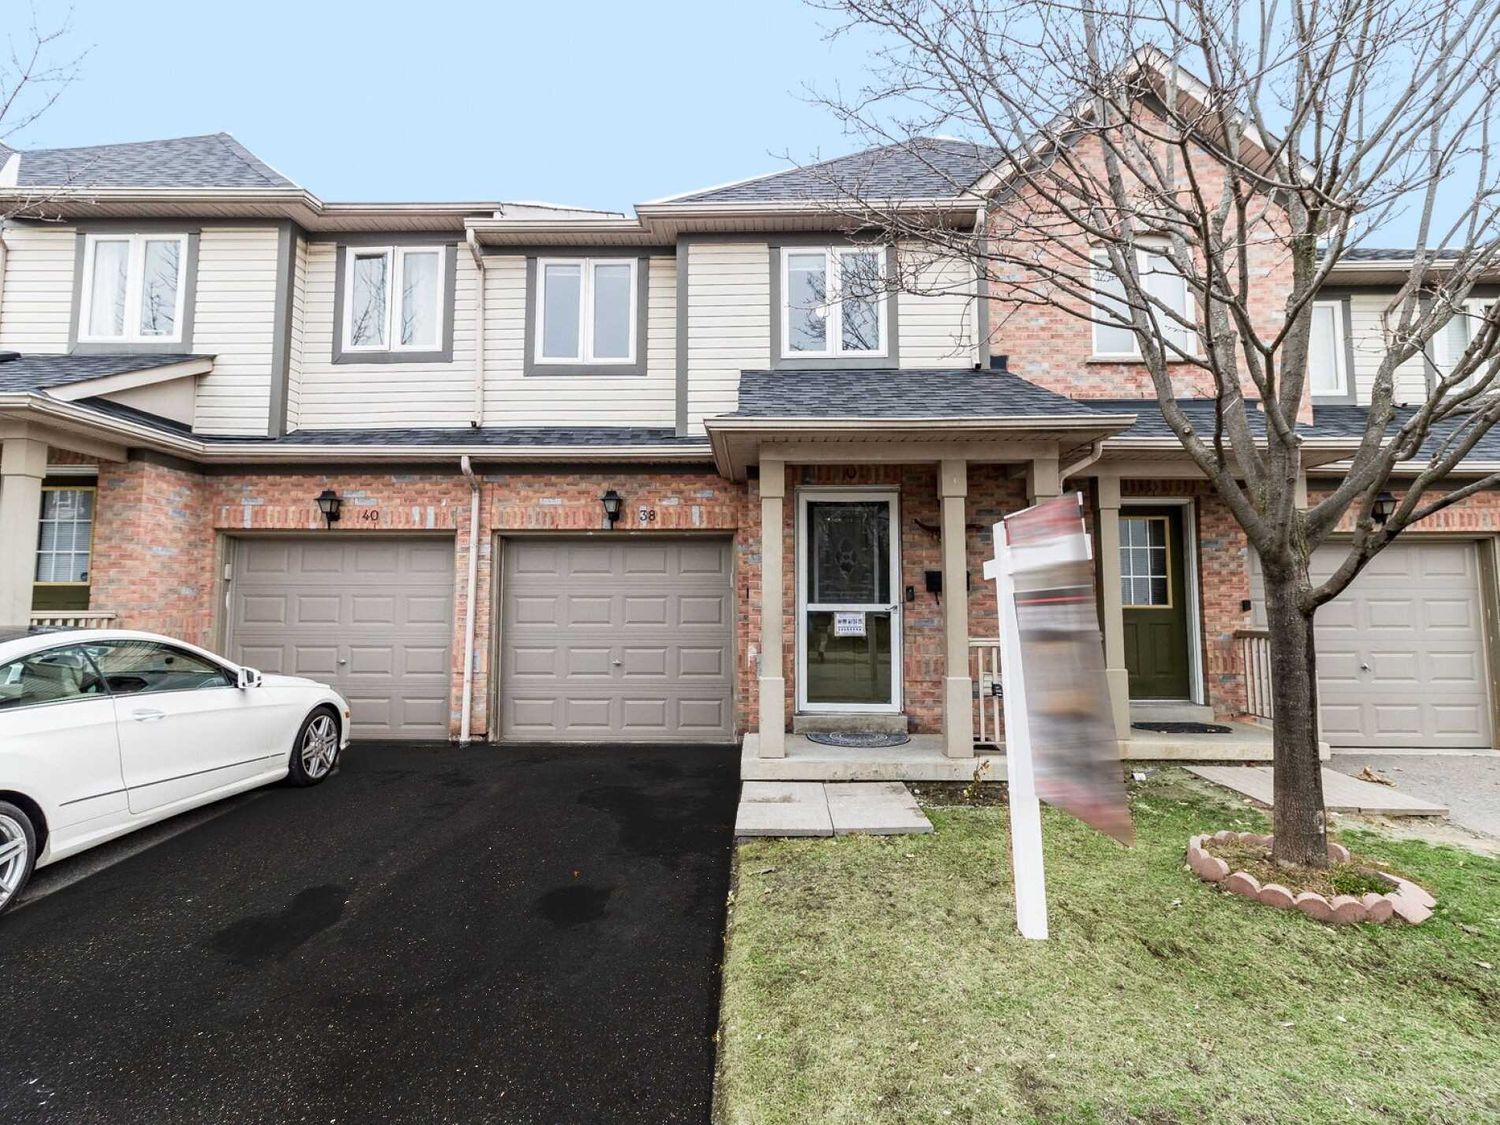 5255 Guildwood Way. 5255 Guildwood Way Townhomes is located in  Mississauga, Toronto - image #1 of 2